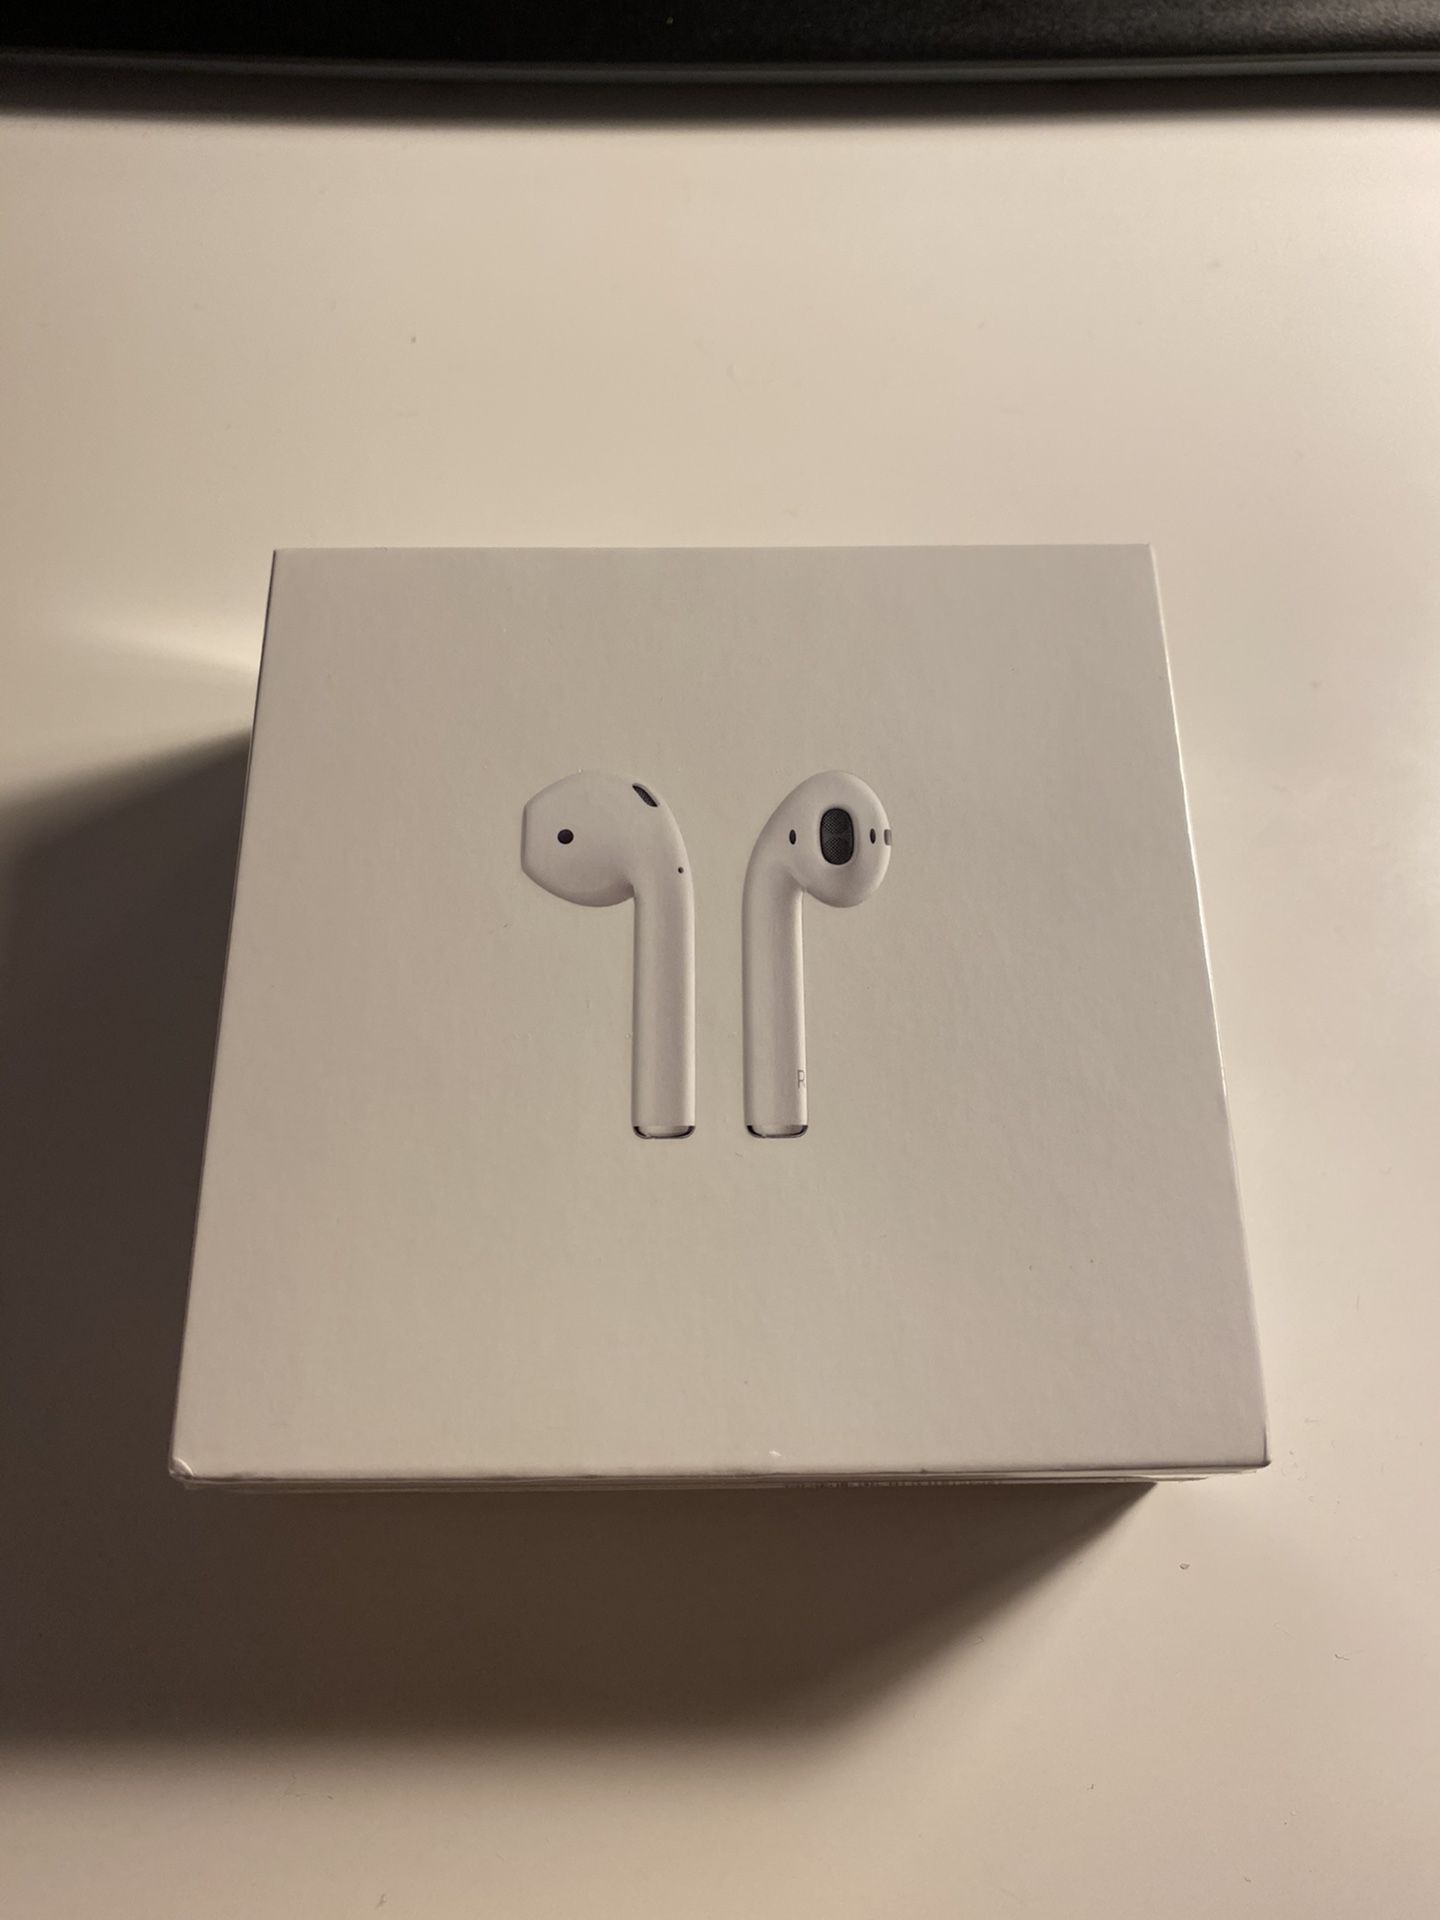 Brand new Apple Airpods with charging case